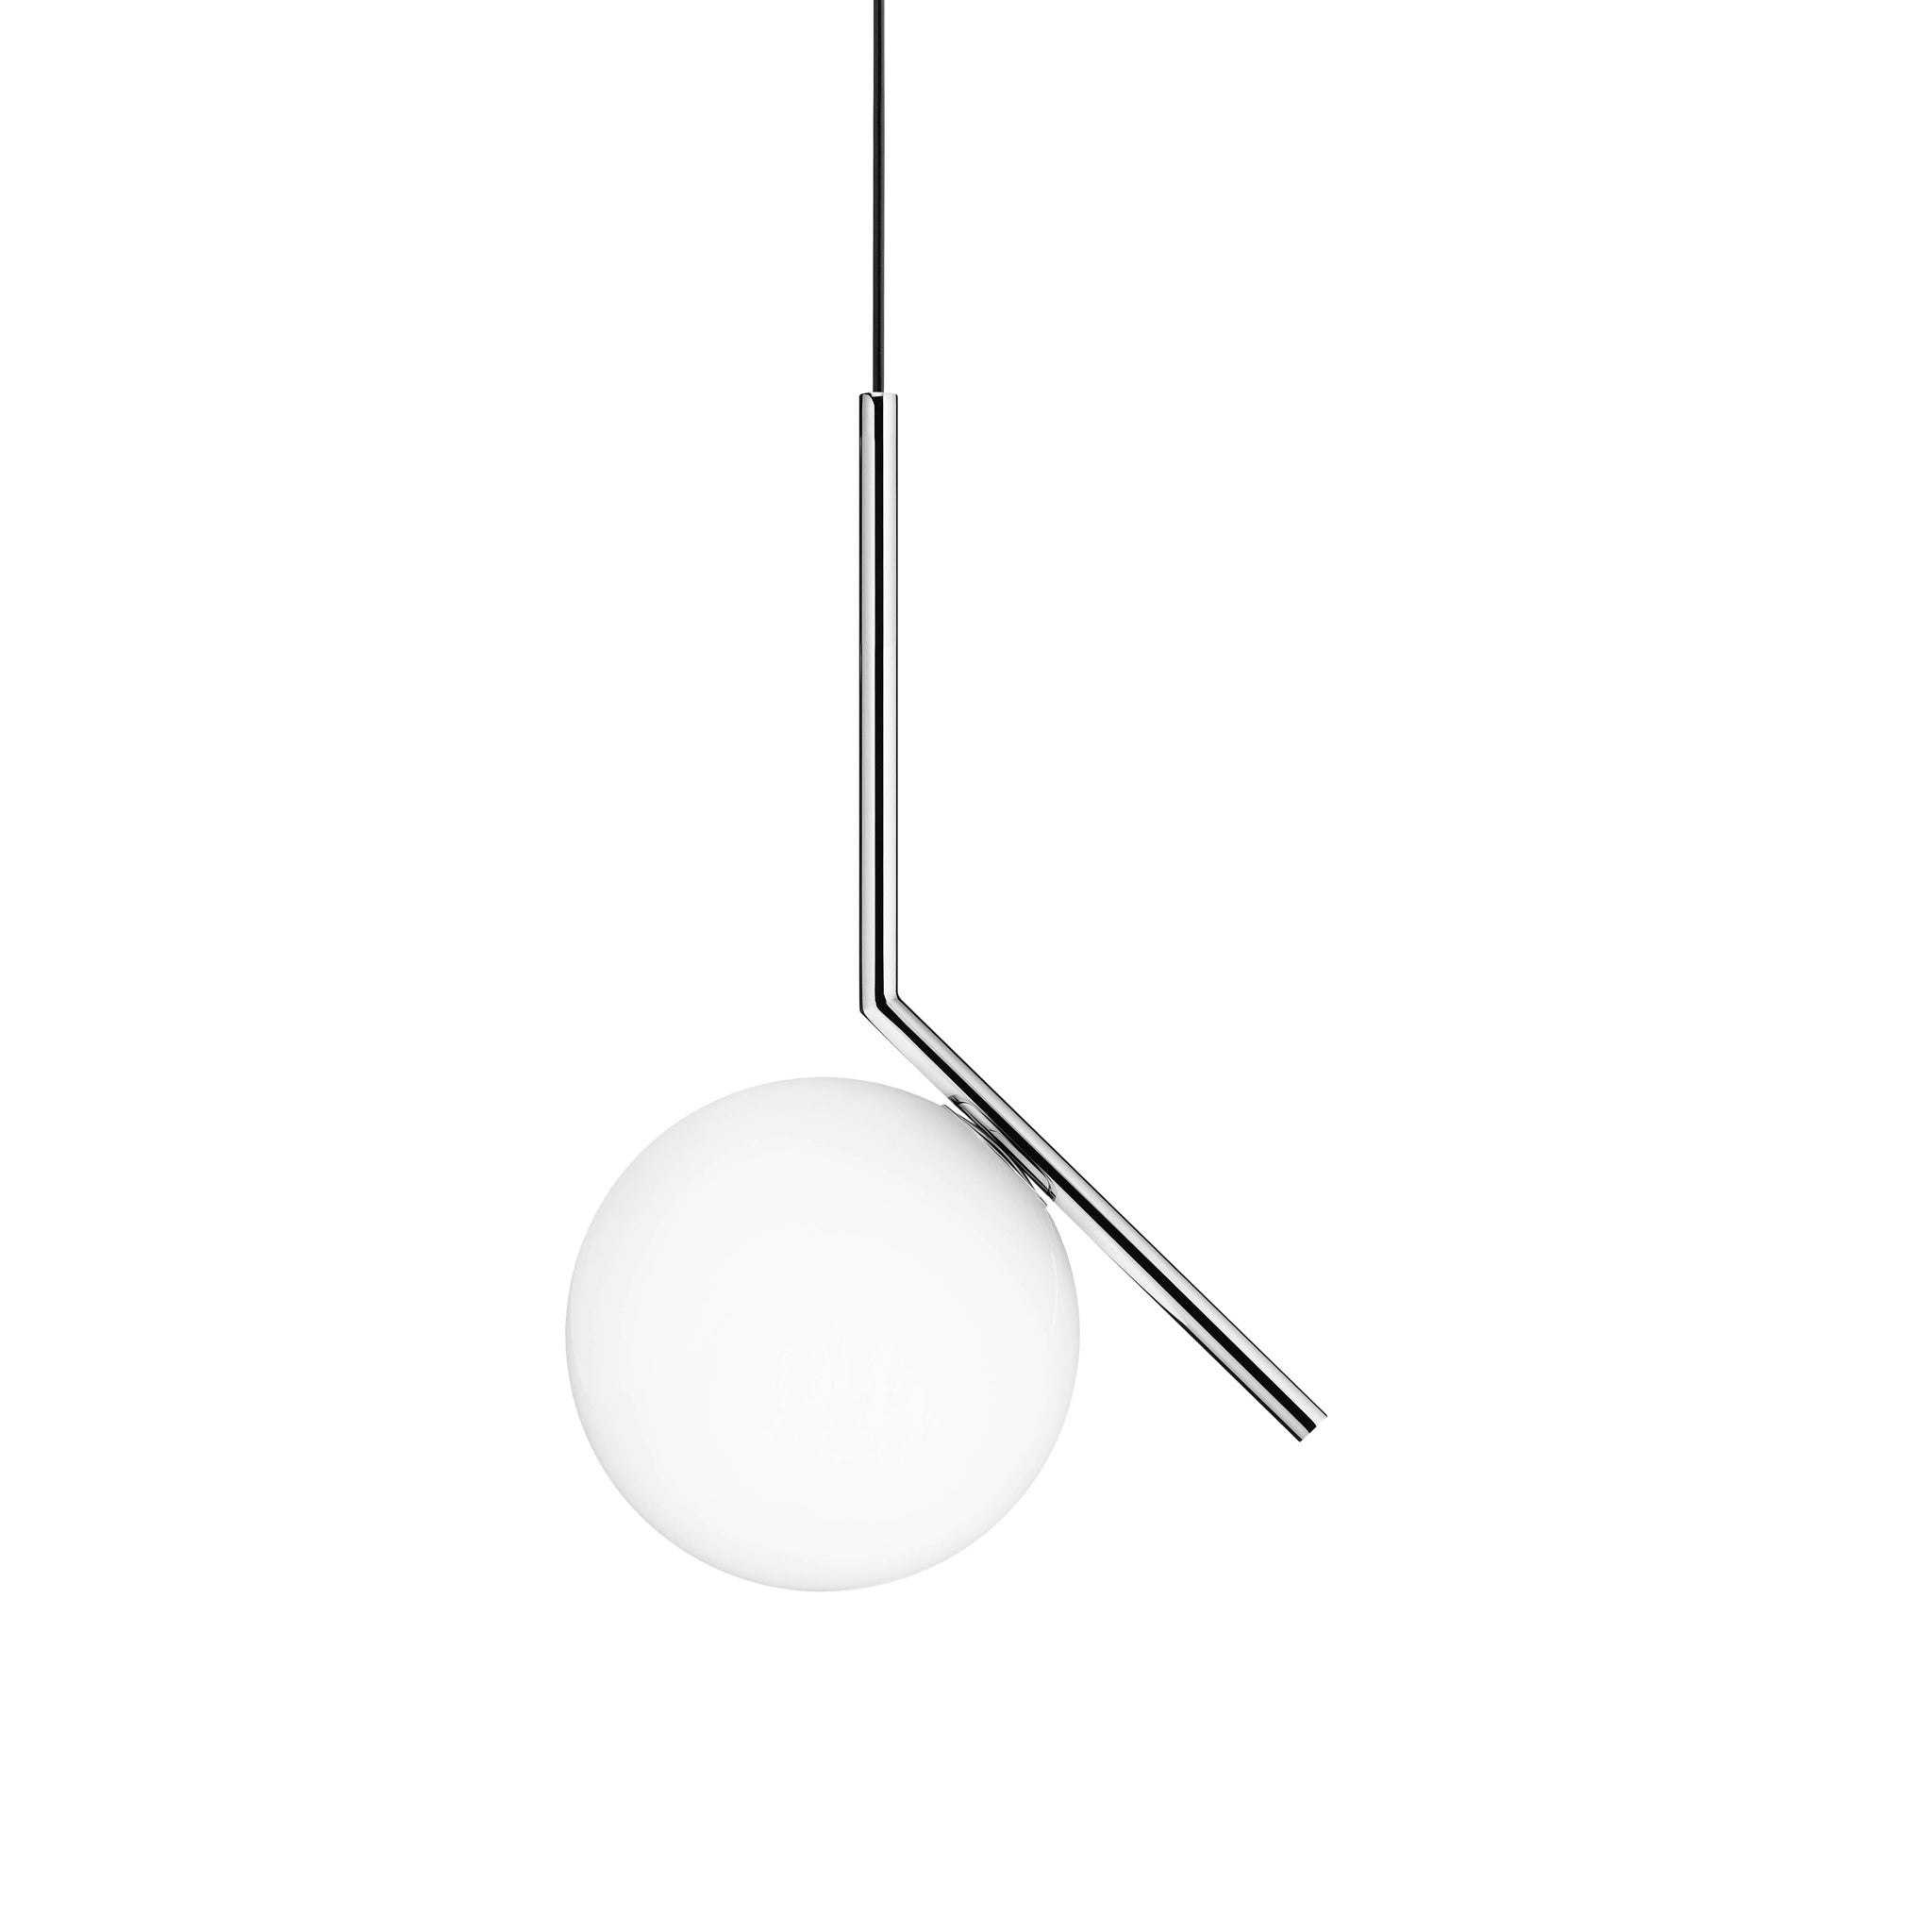 IC S1 light by Flos